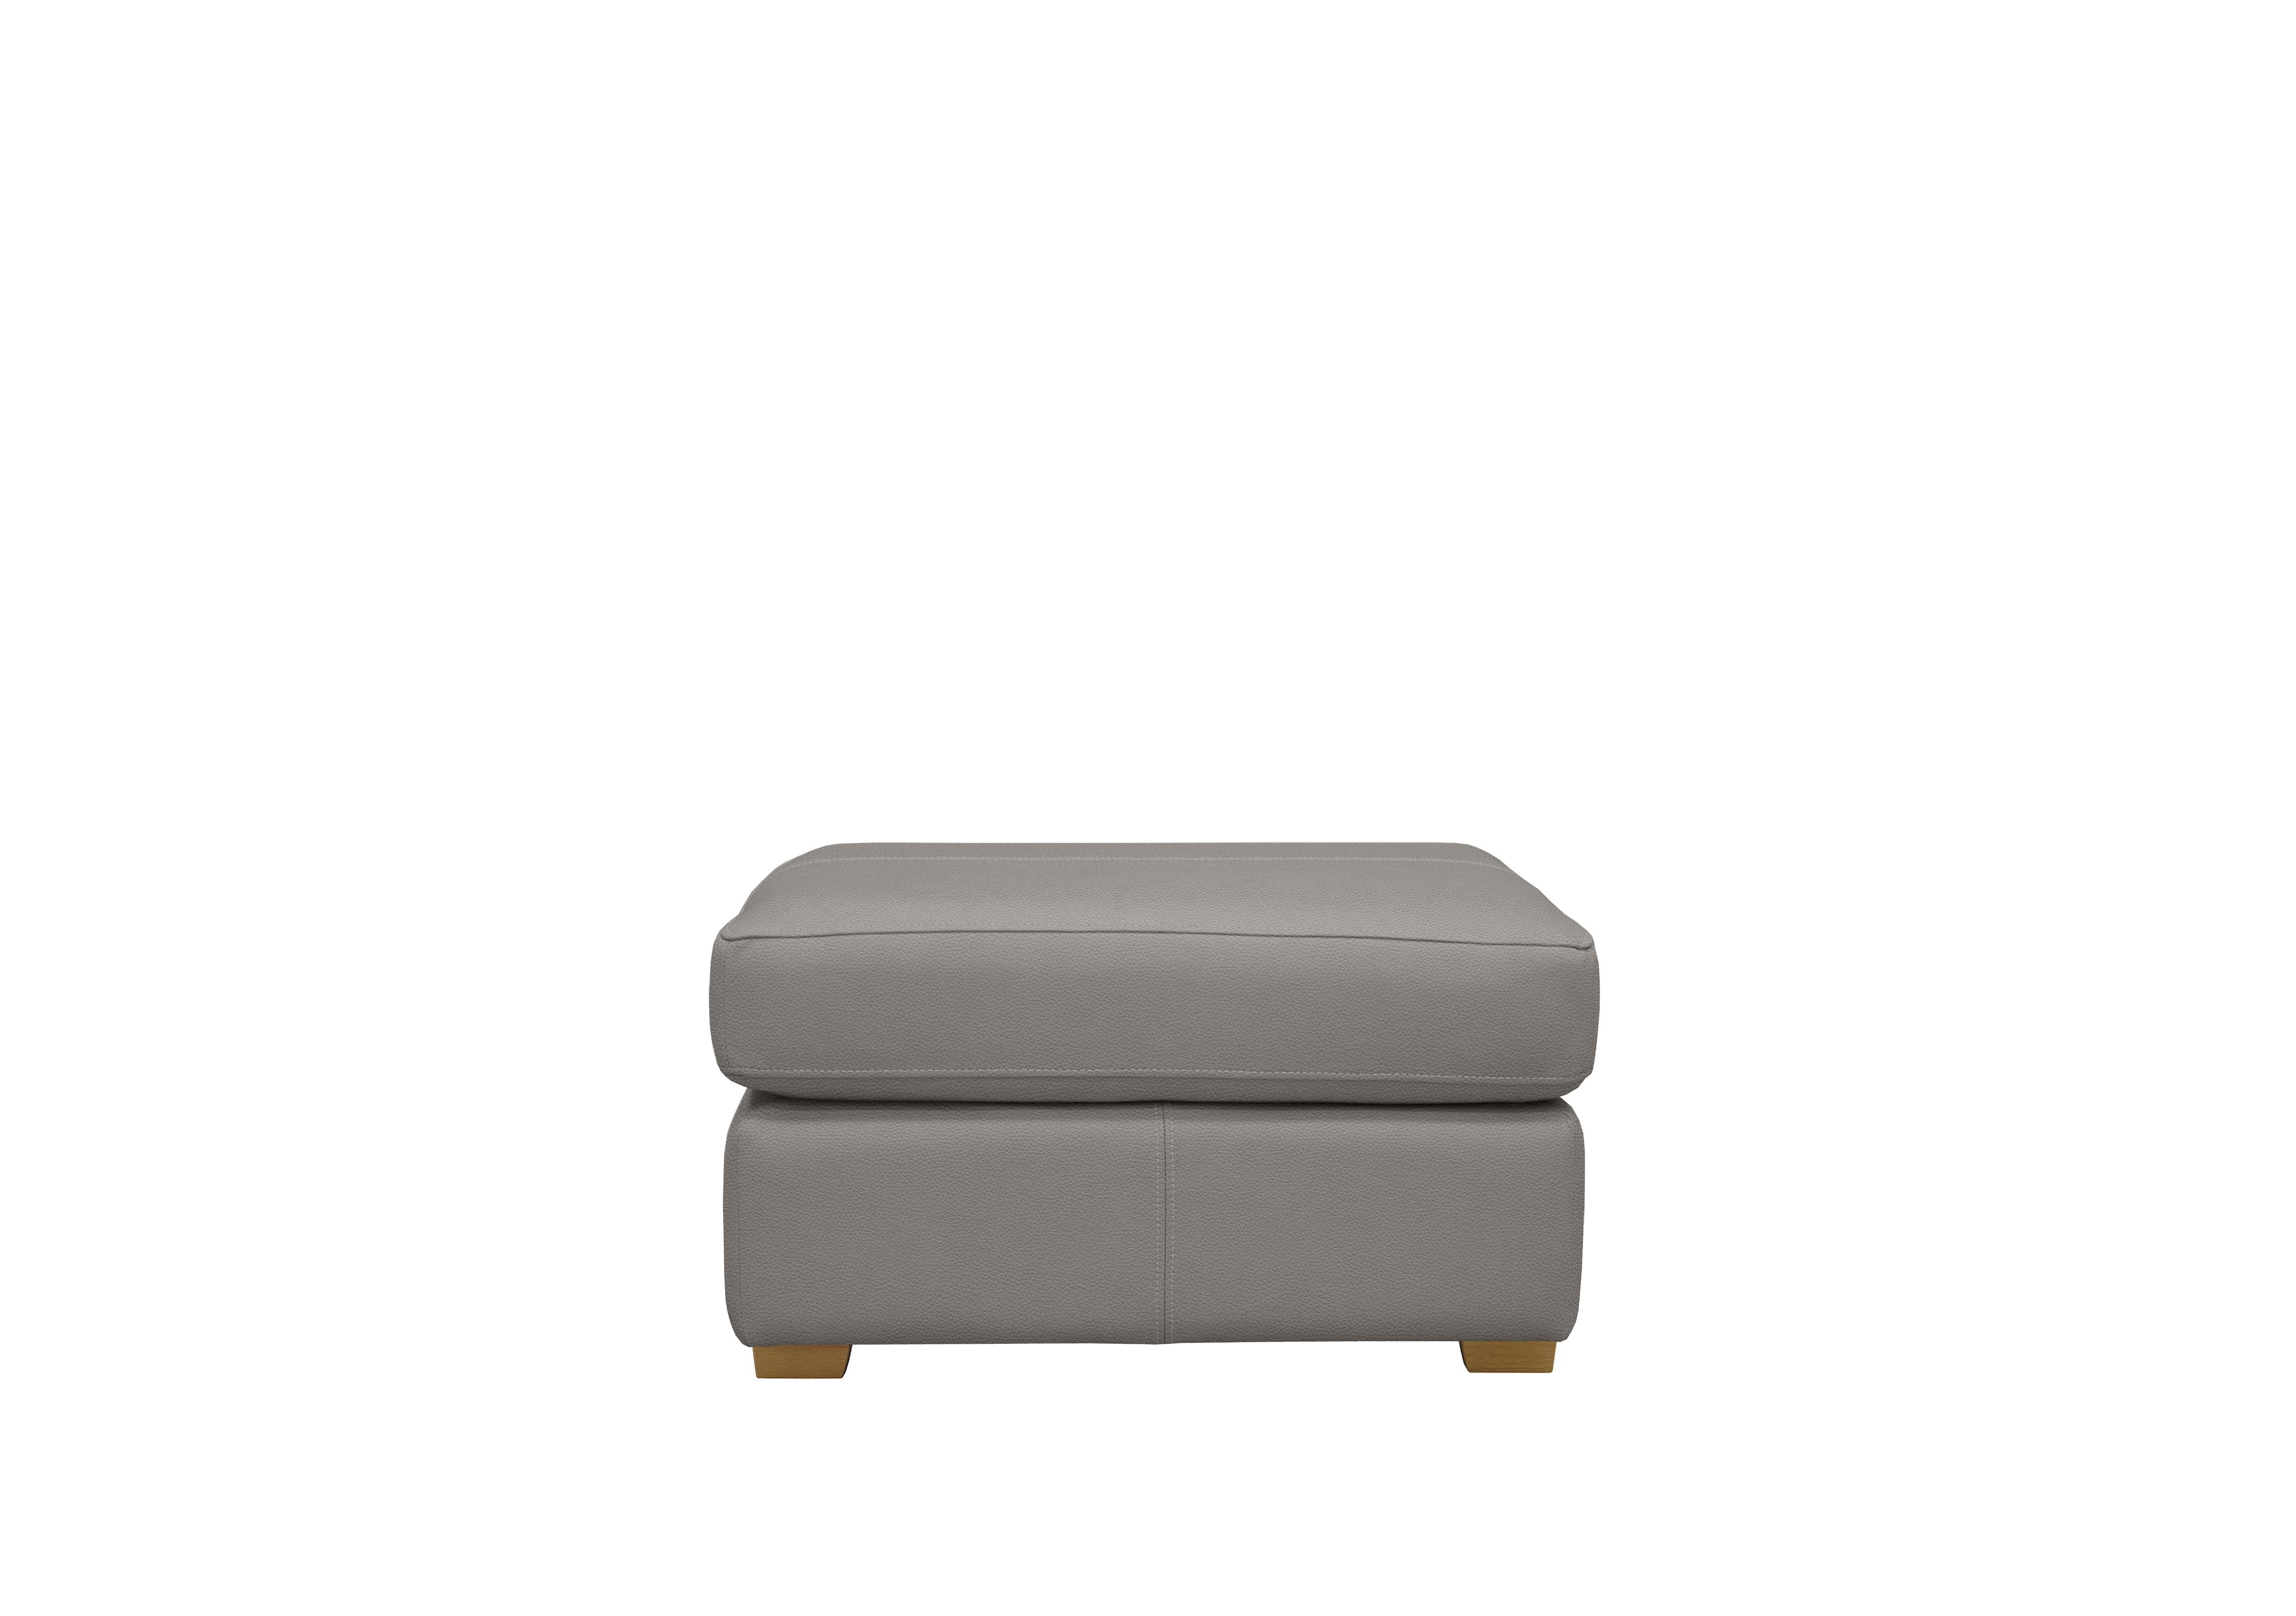 Seattle Leather Storage Footstool with Wooden Feet in L842 Cambridge Grey Ok on Furniture Village